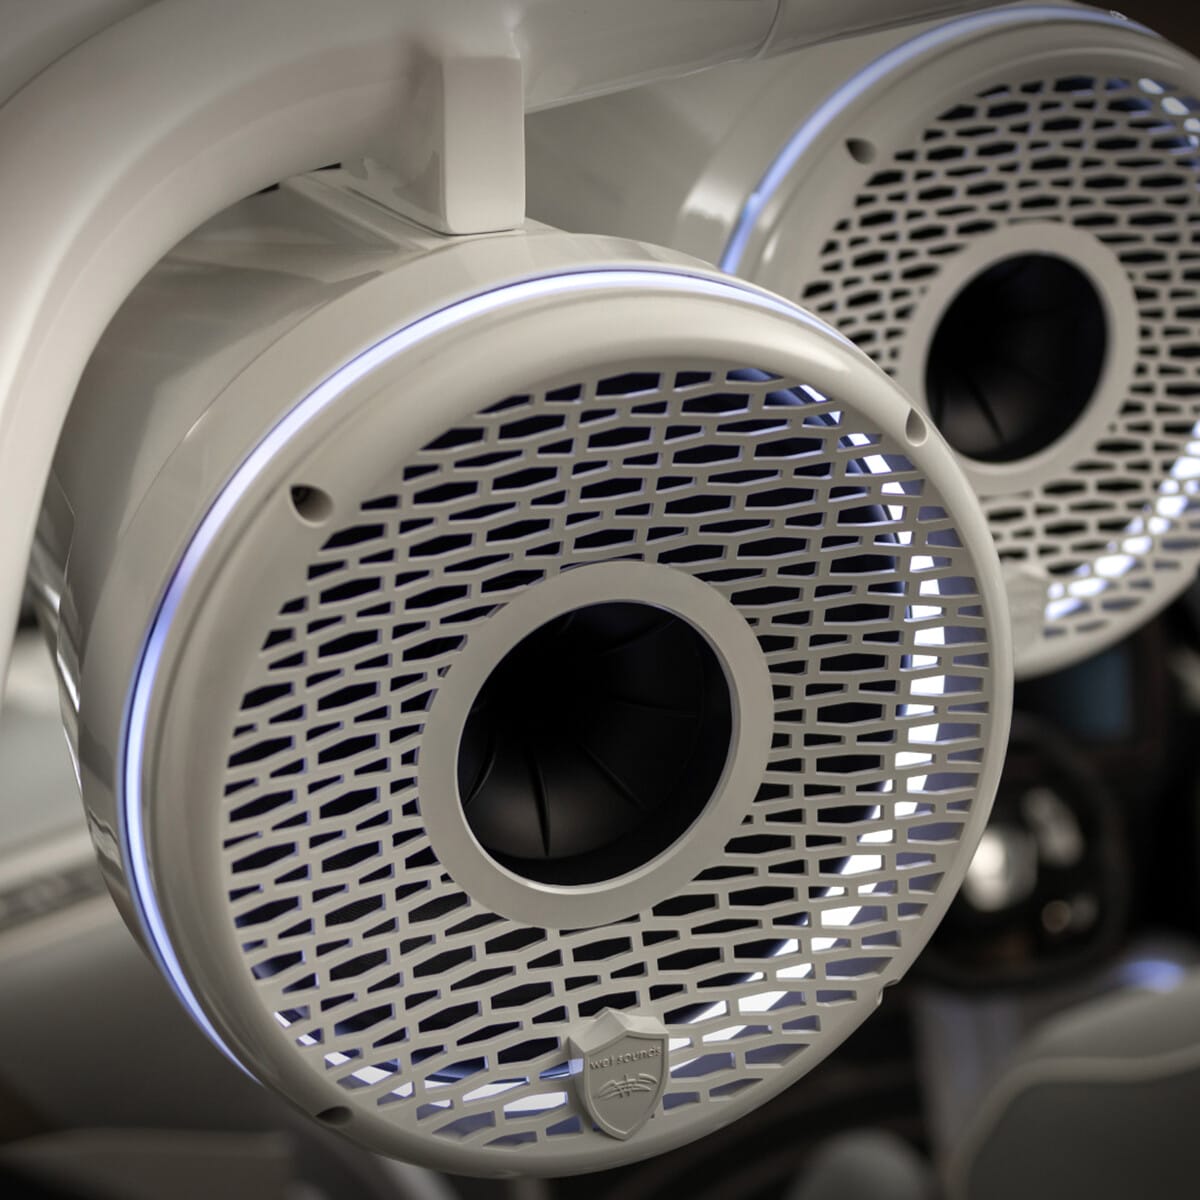 Close-up view of two mounted white speakers with circular grilles and illuminated edges, installed in a vehicle interior.